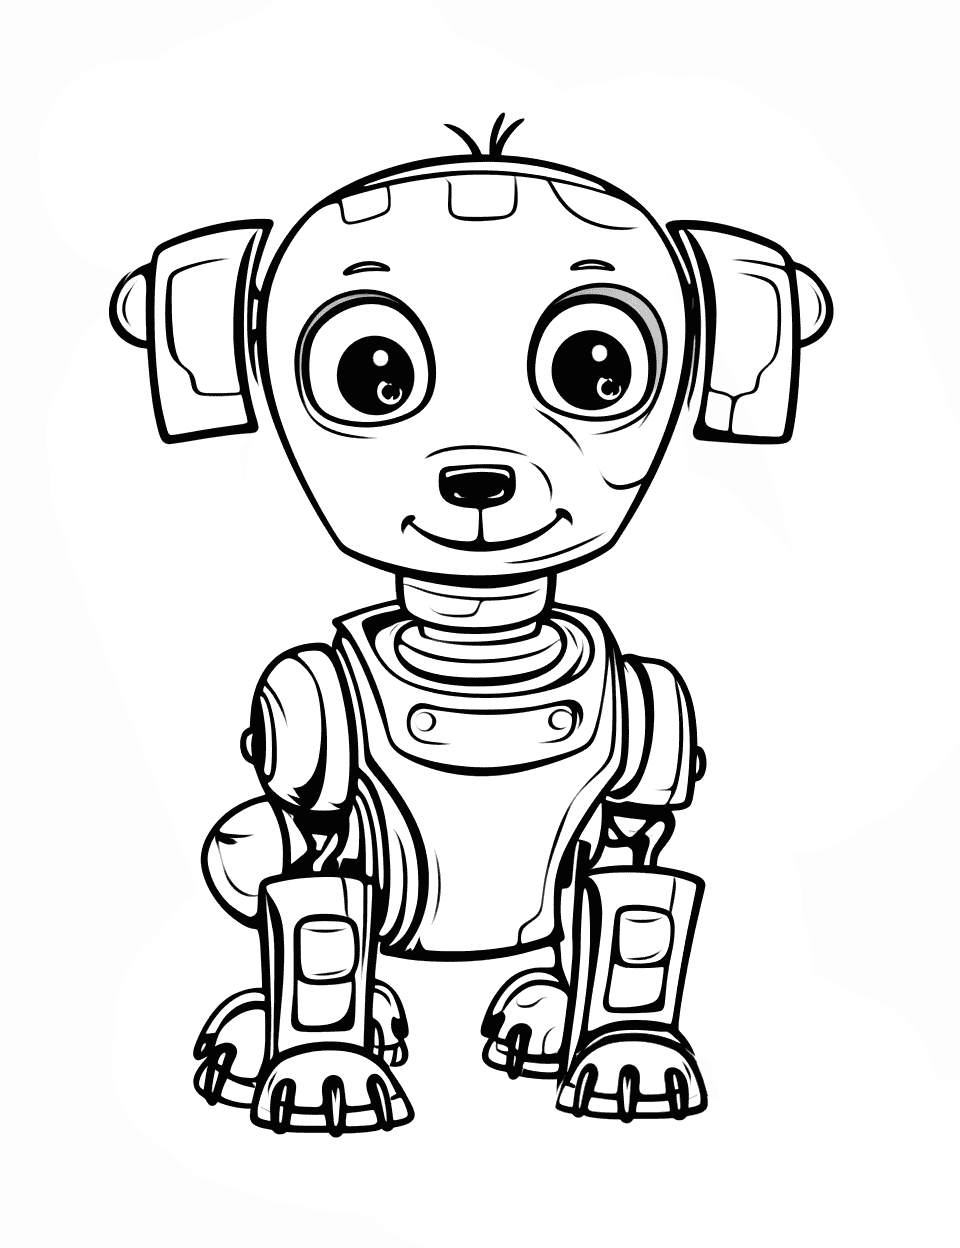 Friendly Robot Dog Coloring Page - A robot designed to look like a playful dog.